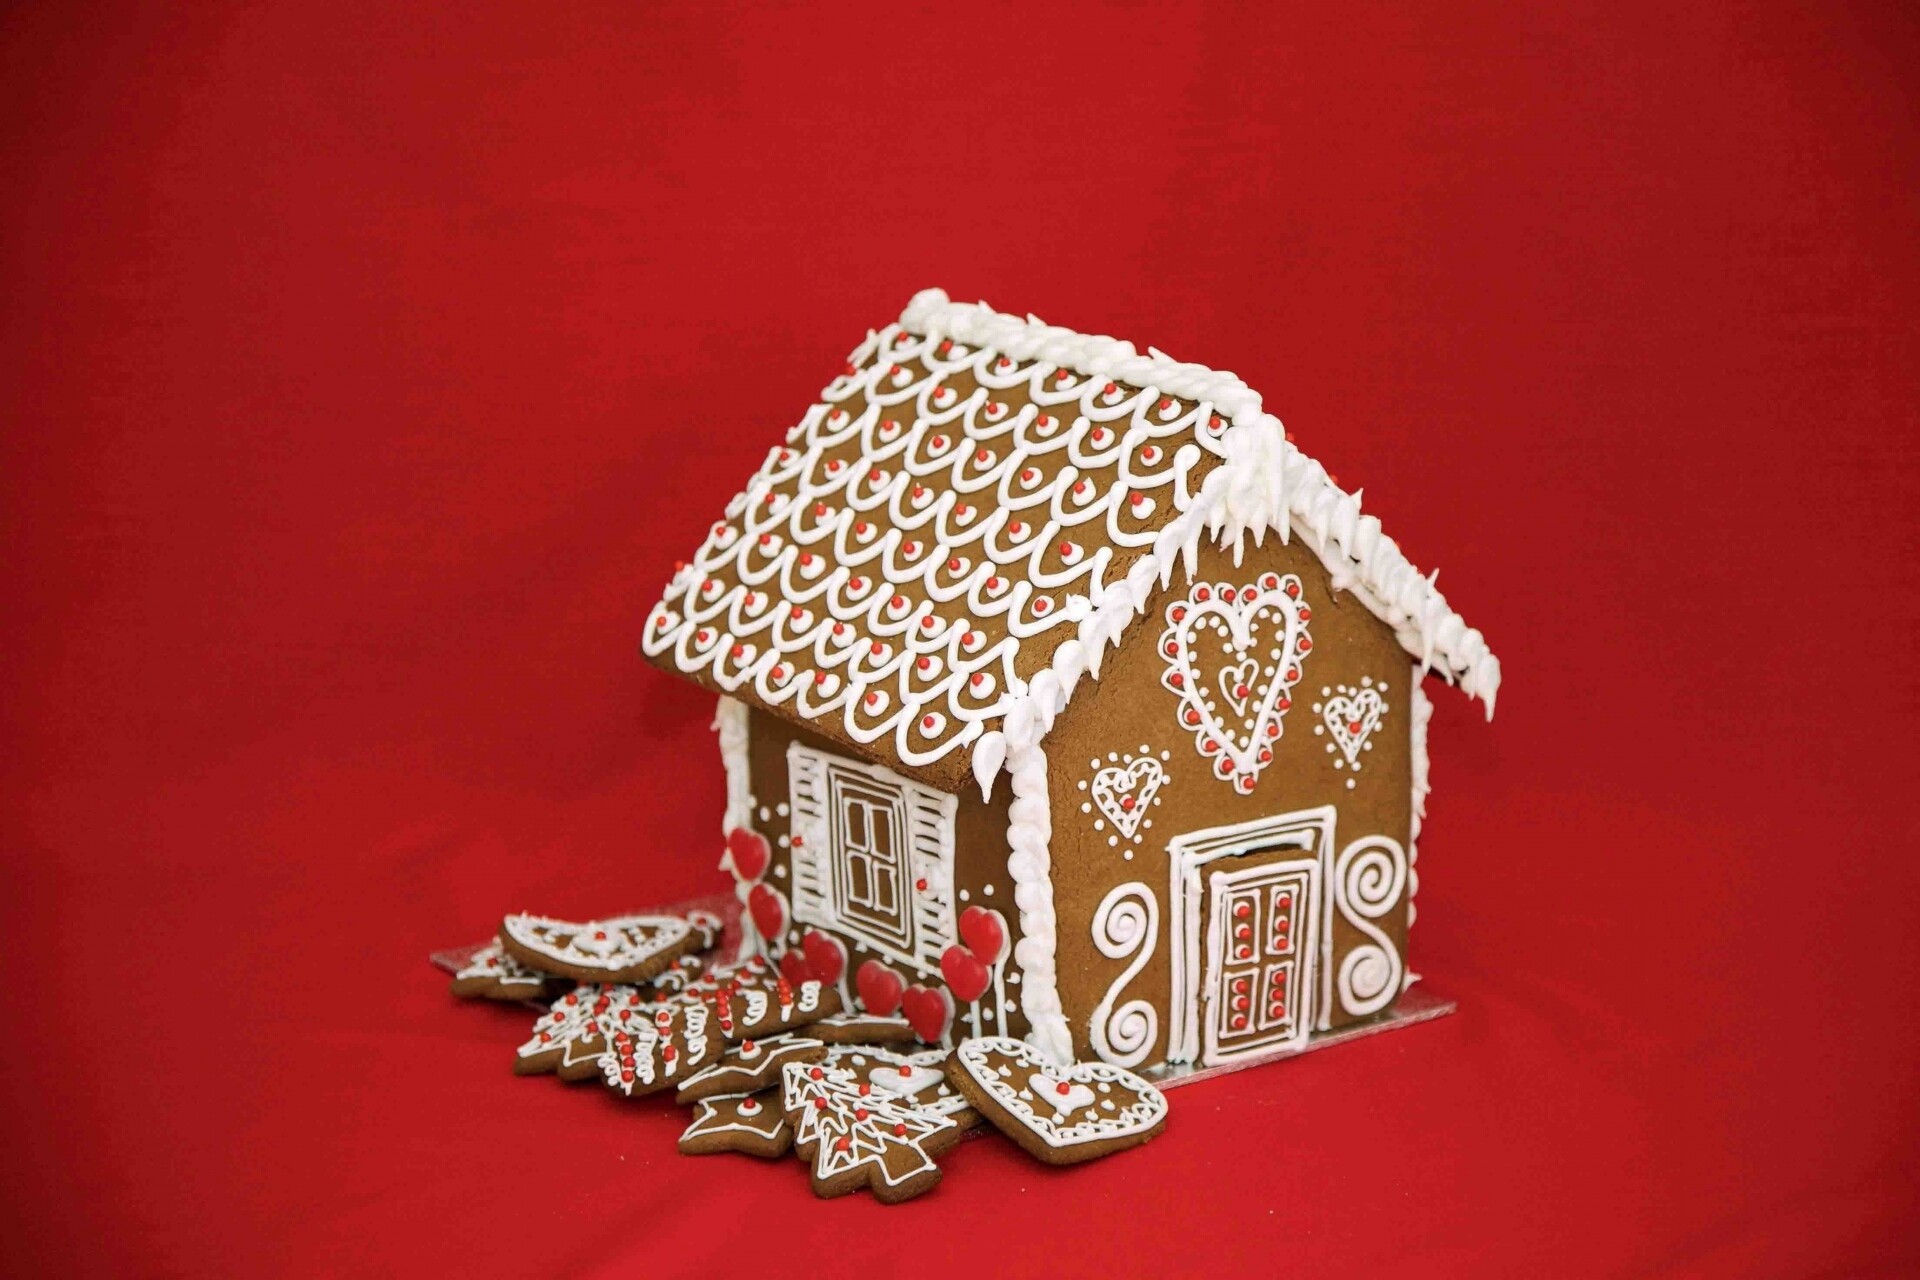 Christmas-themed cake, Festive gingerbread house, Red and white design, Delicious and indulgent, 1920x1280 HD Desktop